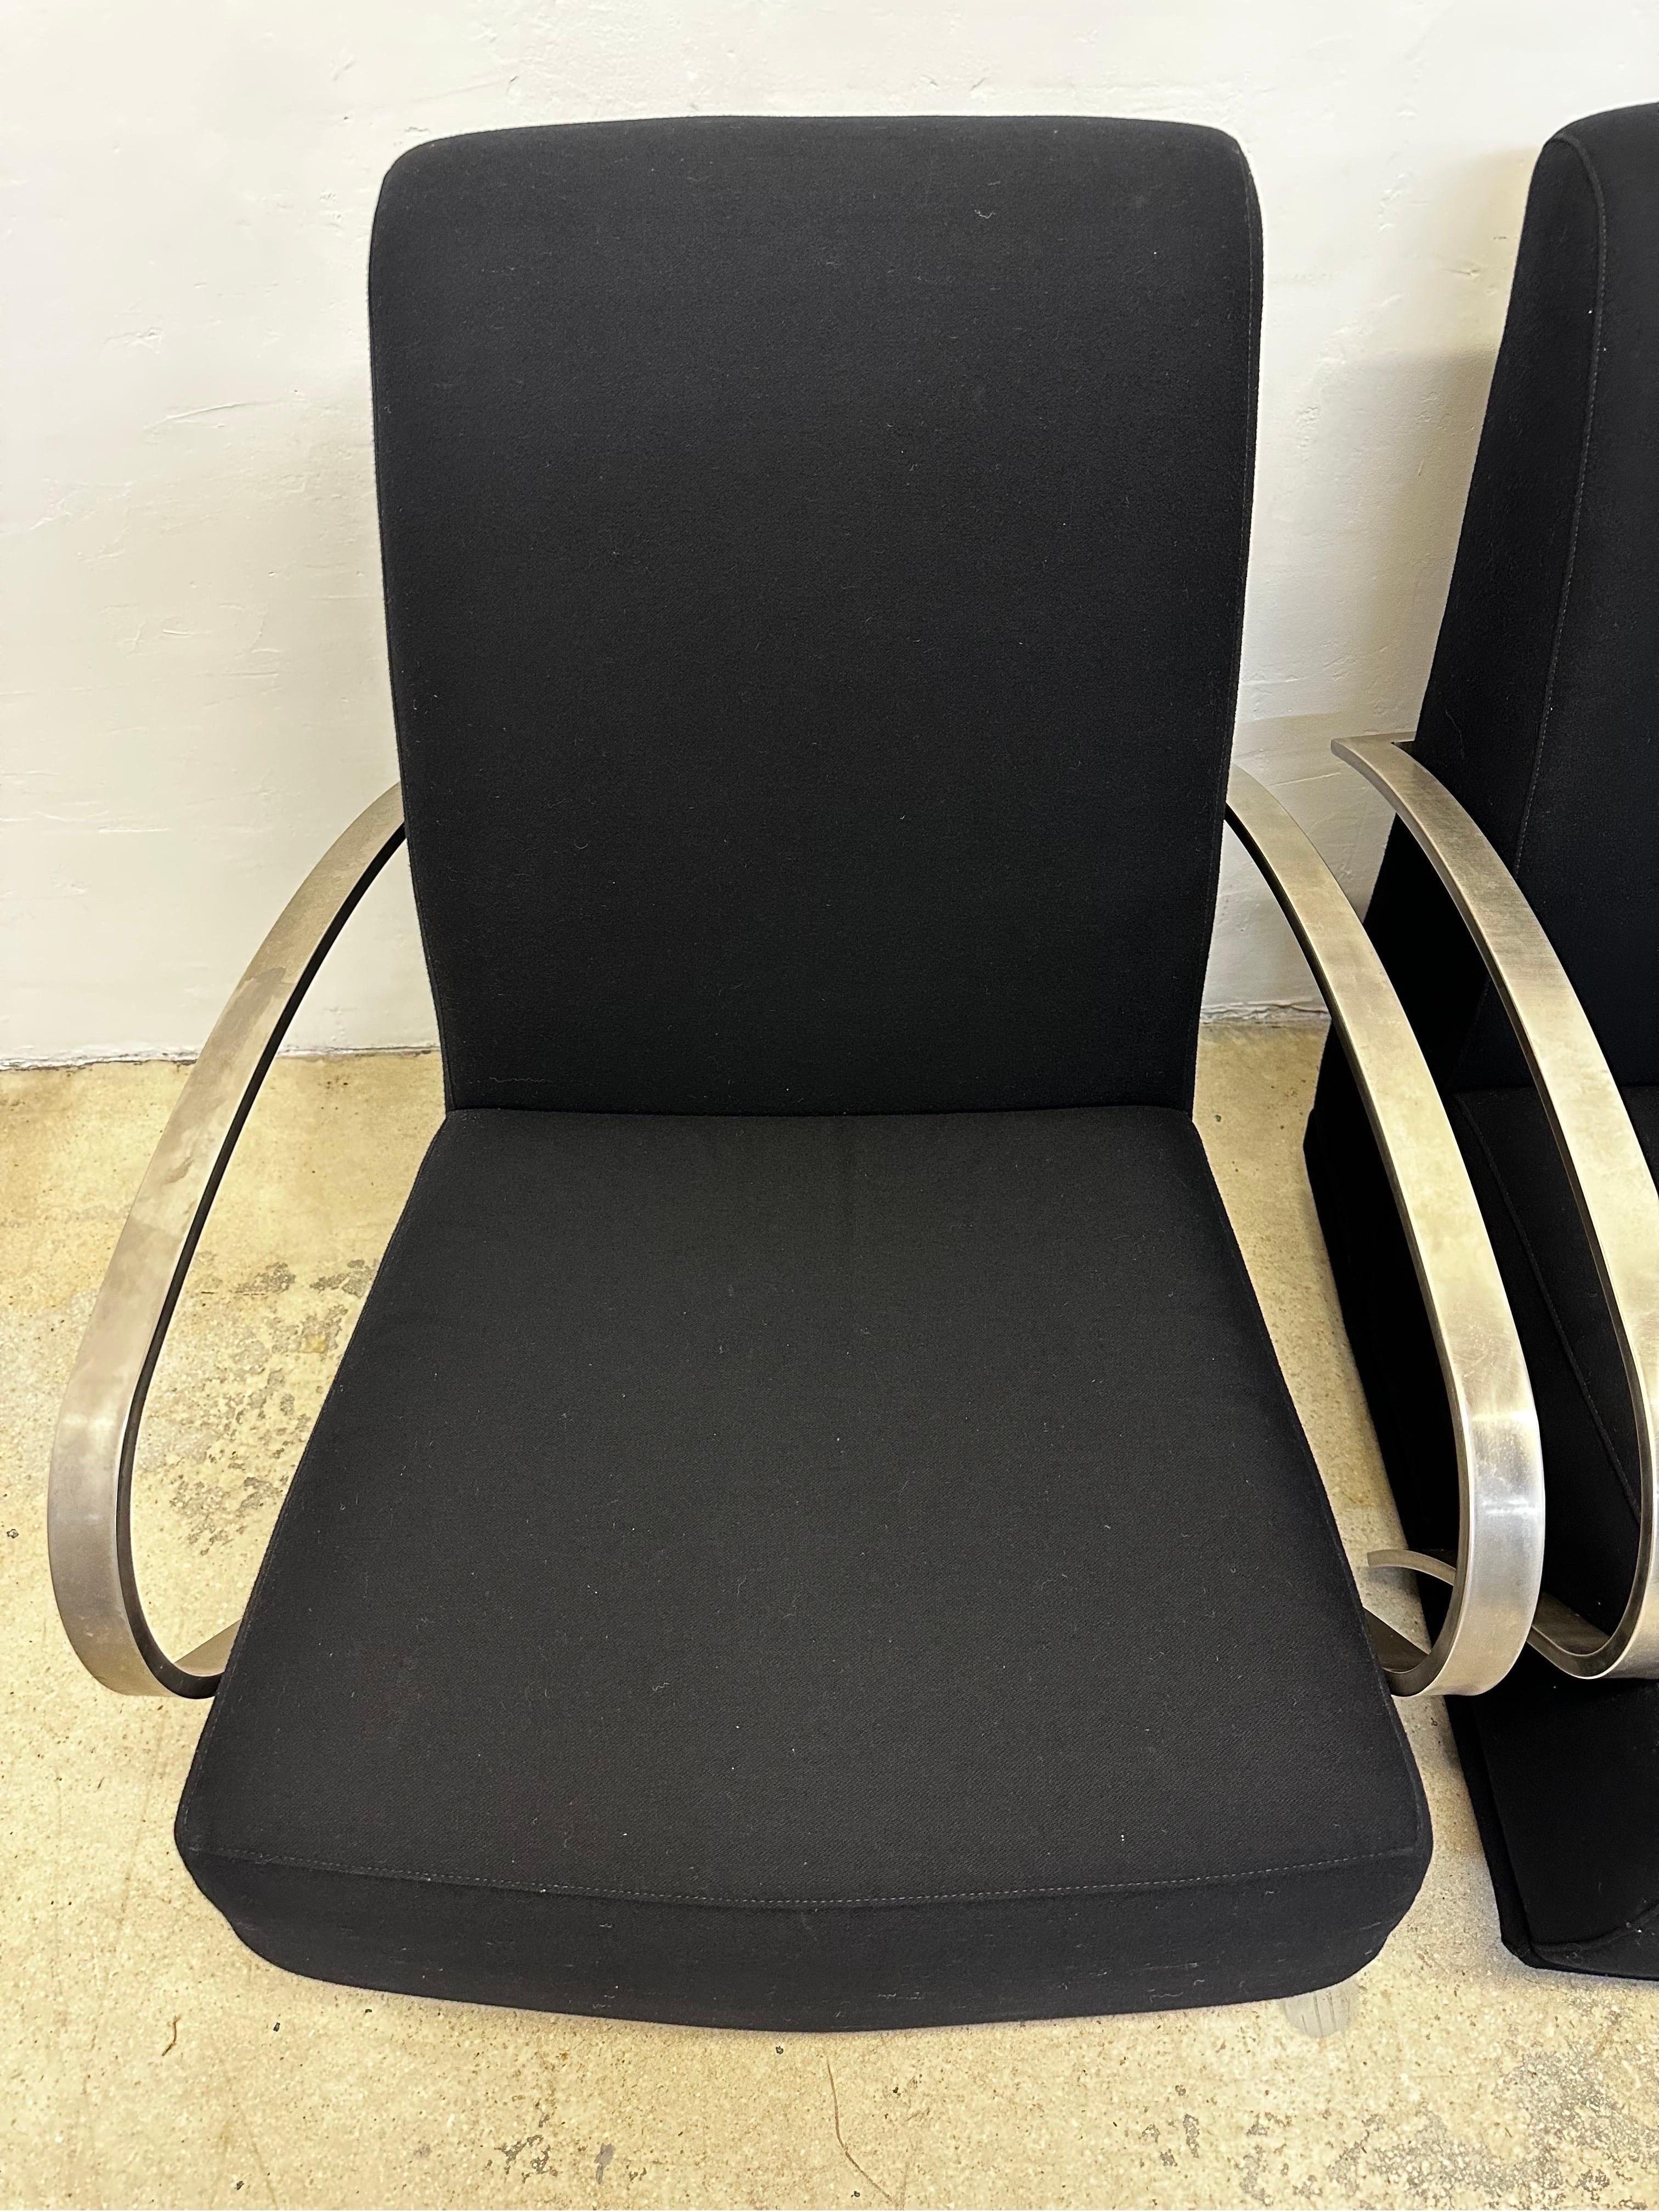 Art Deco Revival Black Lounge Chairs With Steel Arms by Directional - a Pair For Sale 4